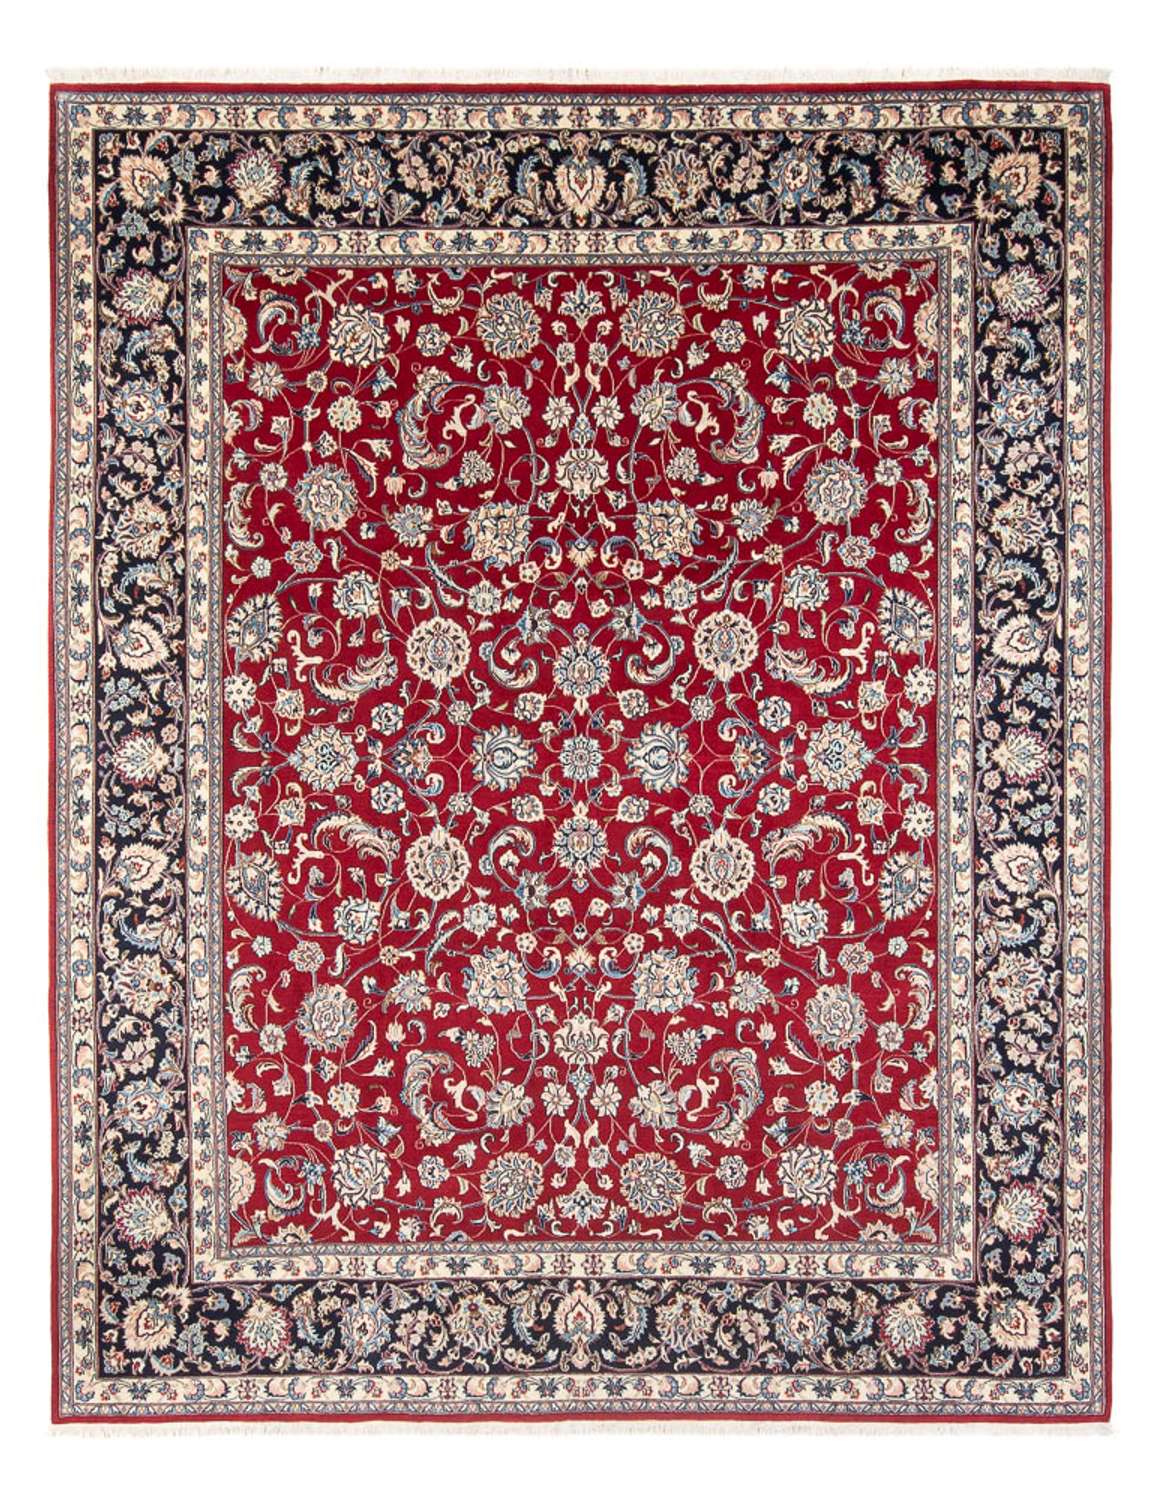 Perser Rug - Classic - 305 x 247 cm - red